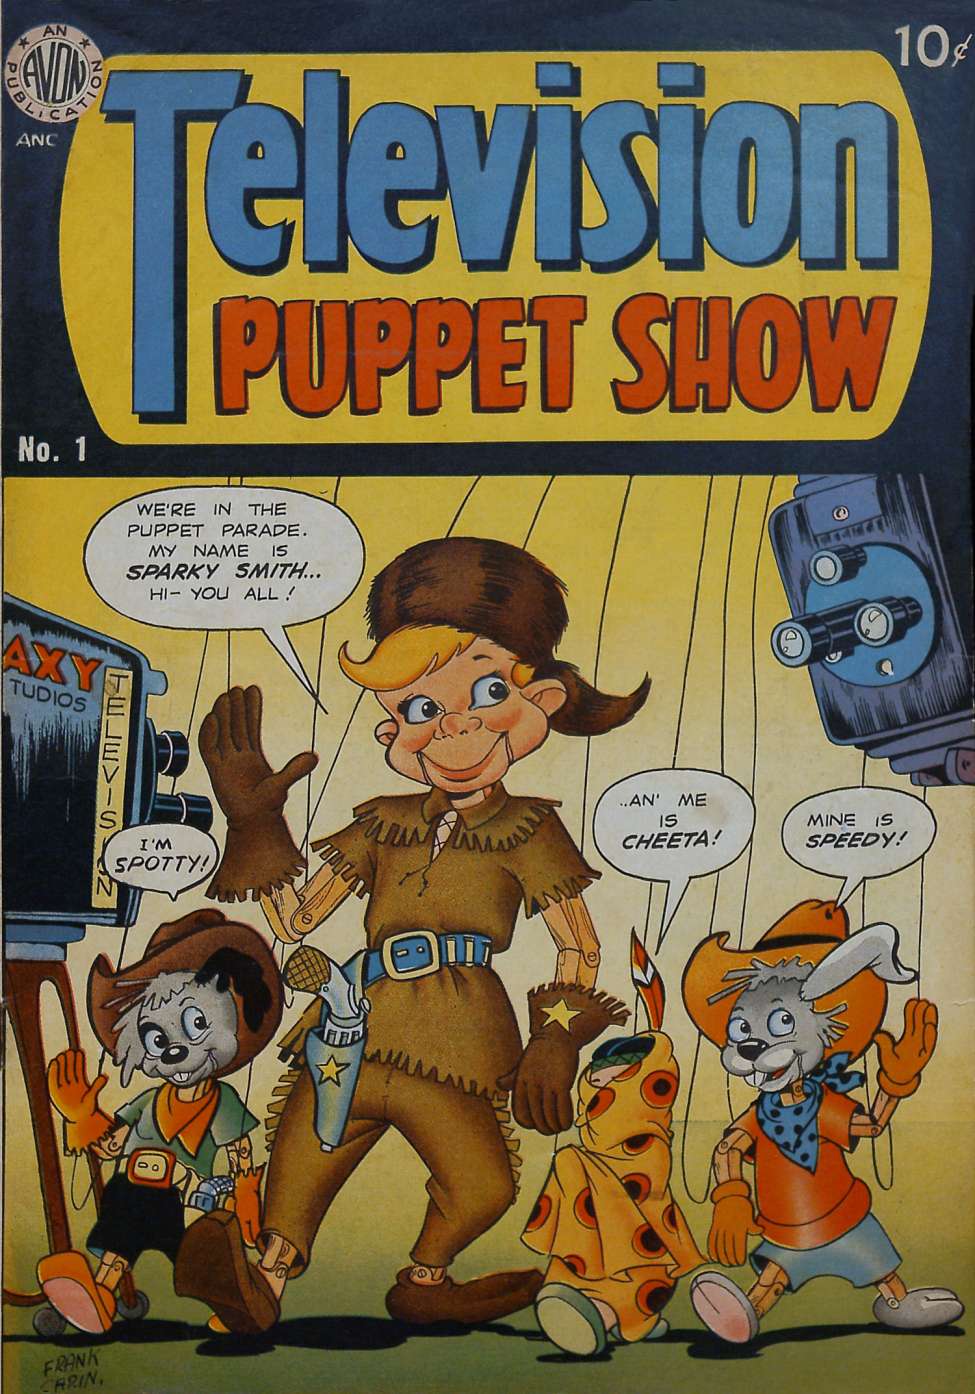 Book Cover For Television Puppet Show 1